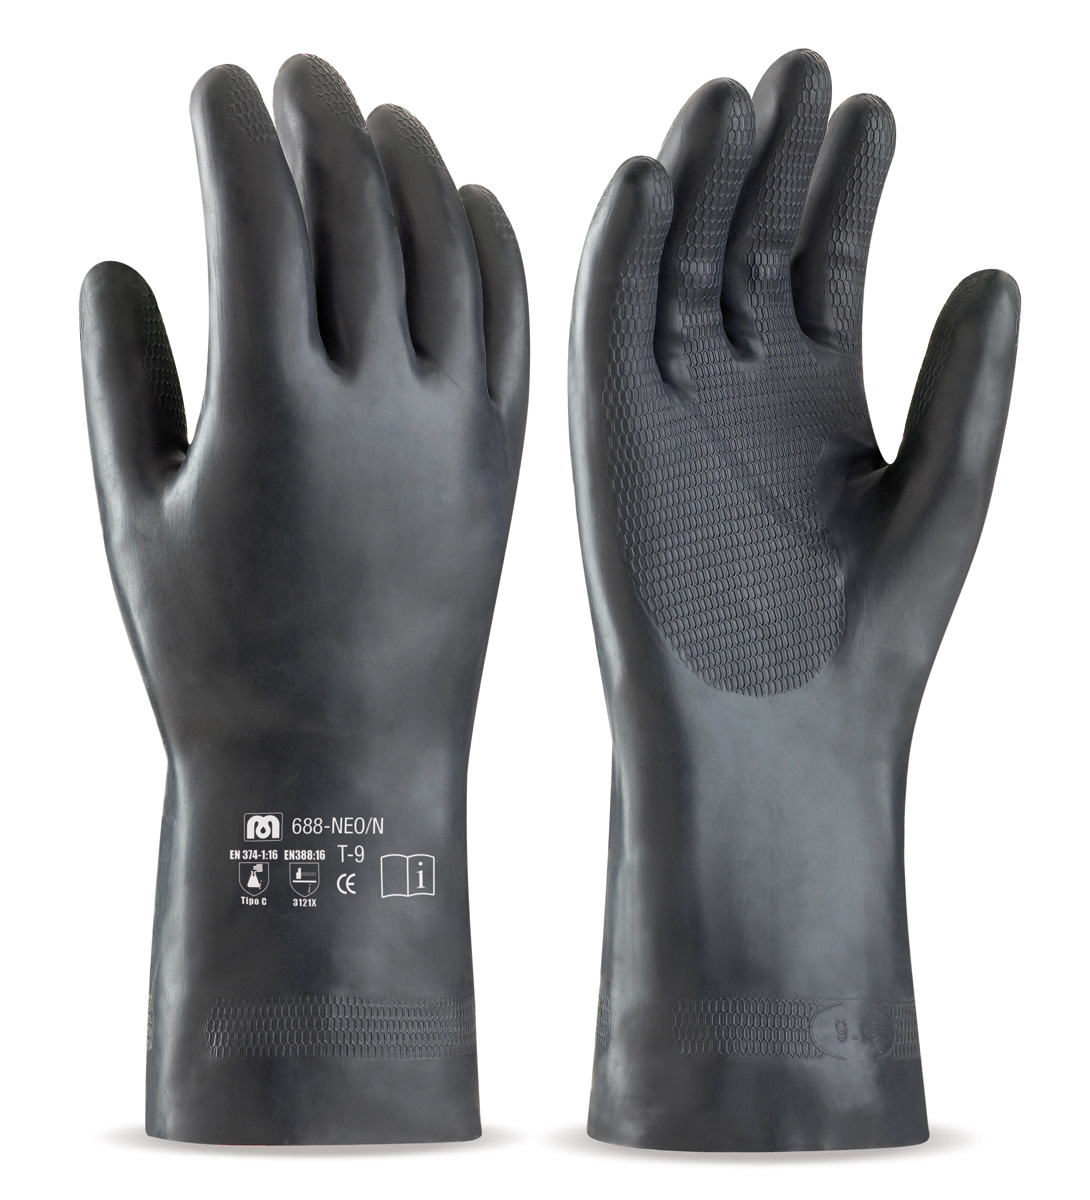 688-LB/N Work Gloves Neoprene Two-tone latex glove with neoprene reinforcement for chemical and mechanical hazards.